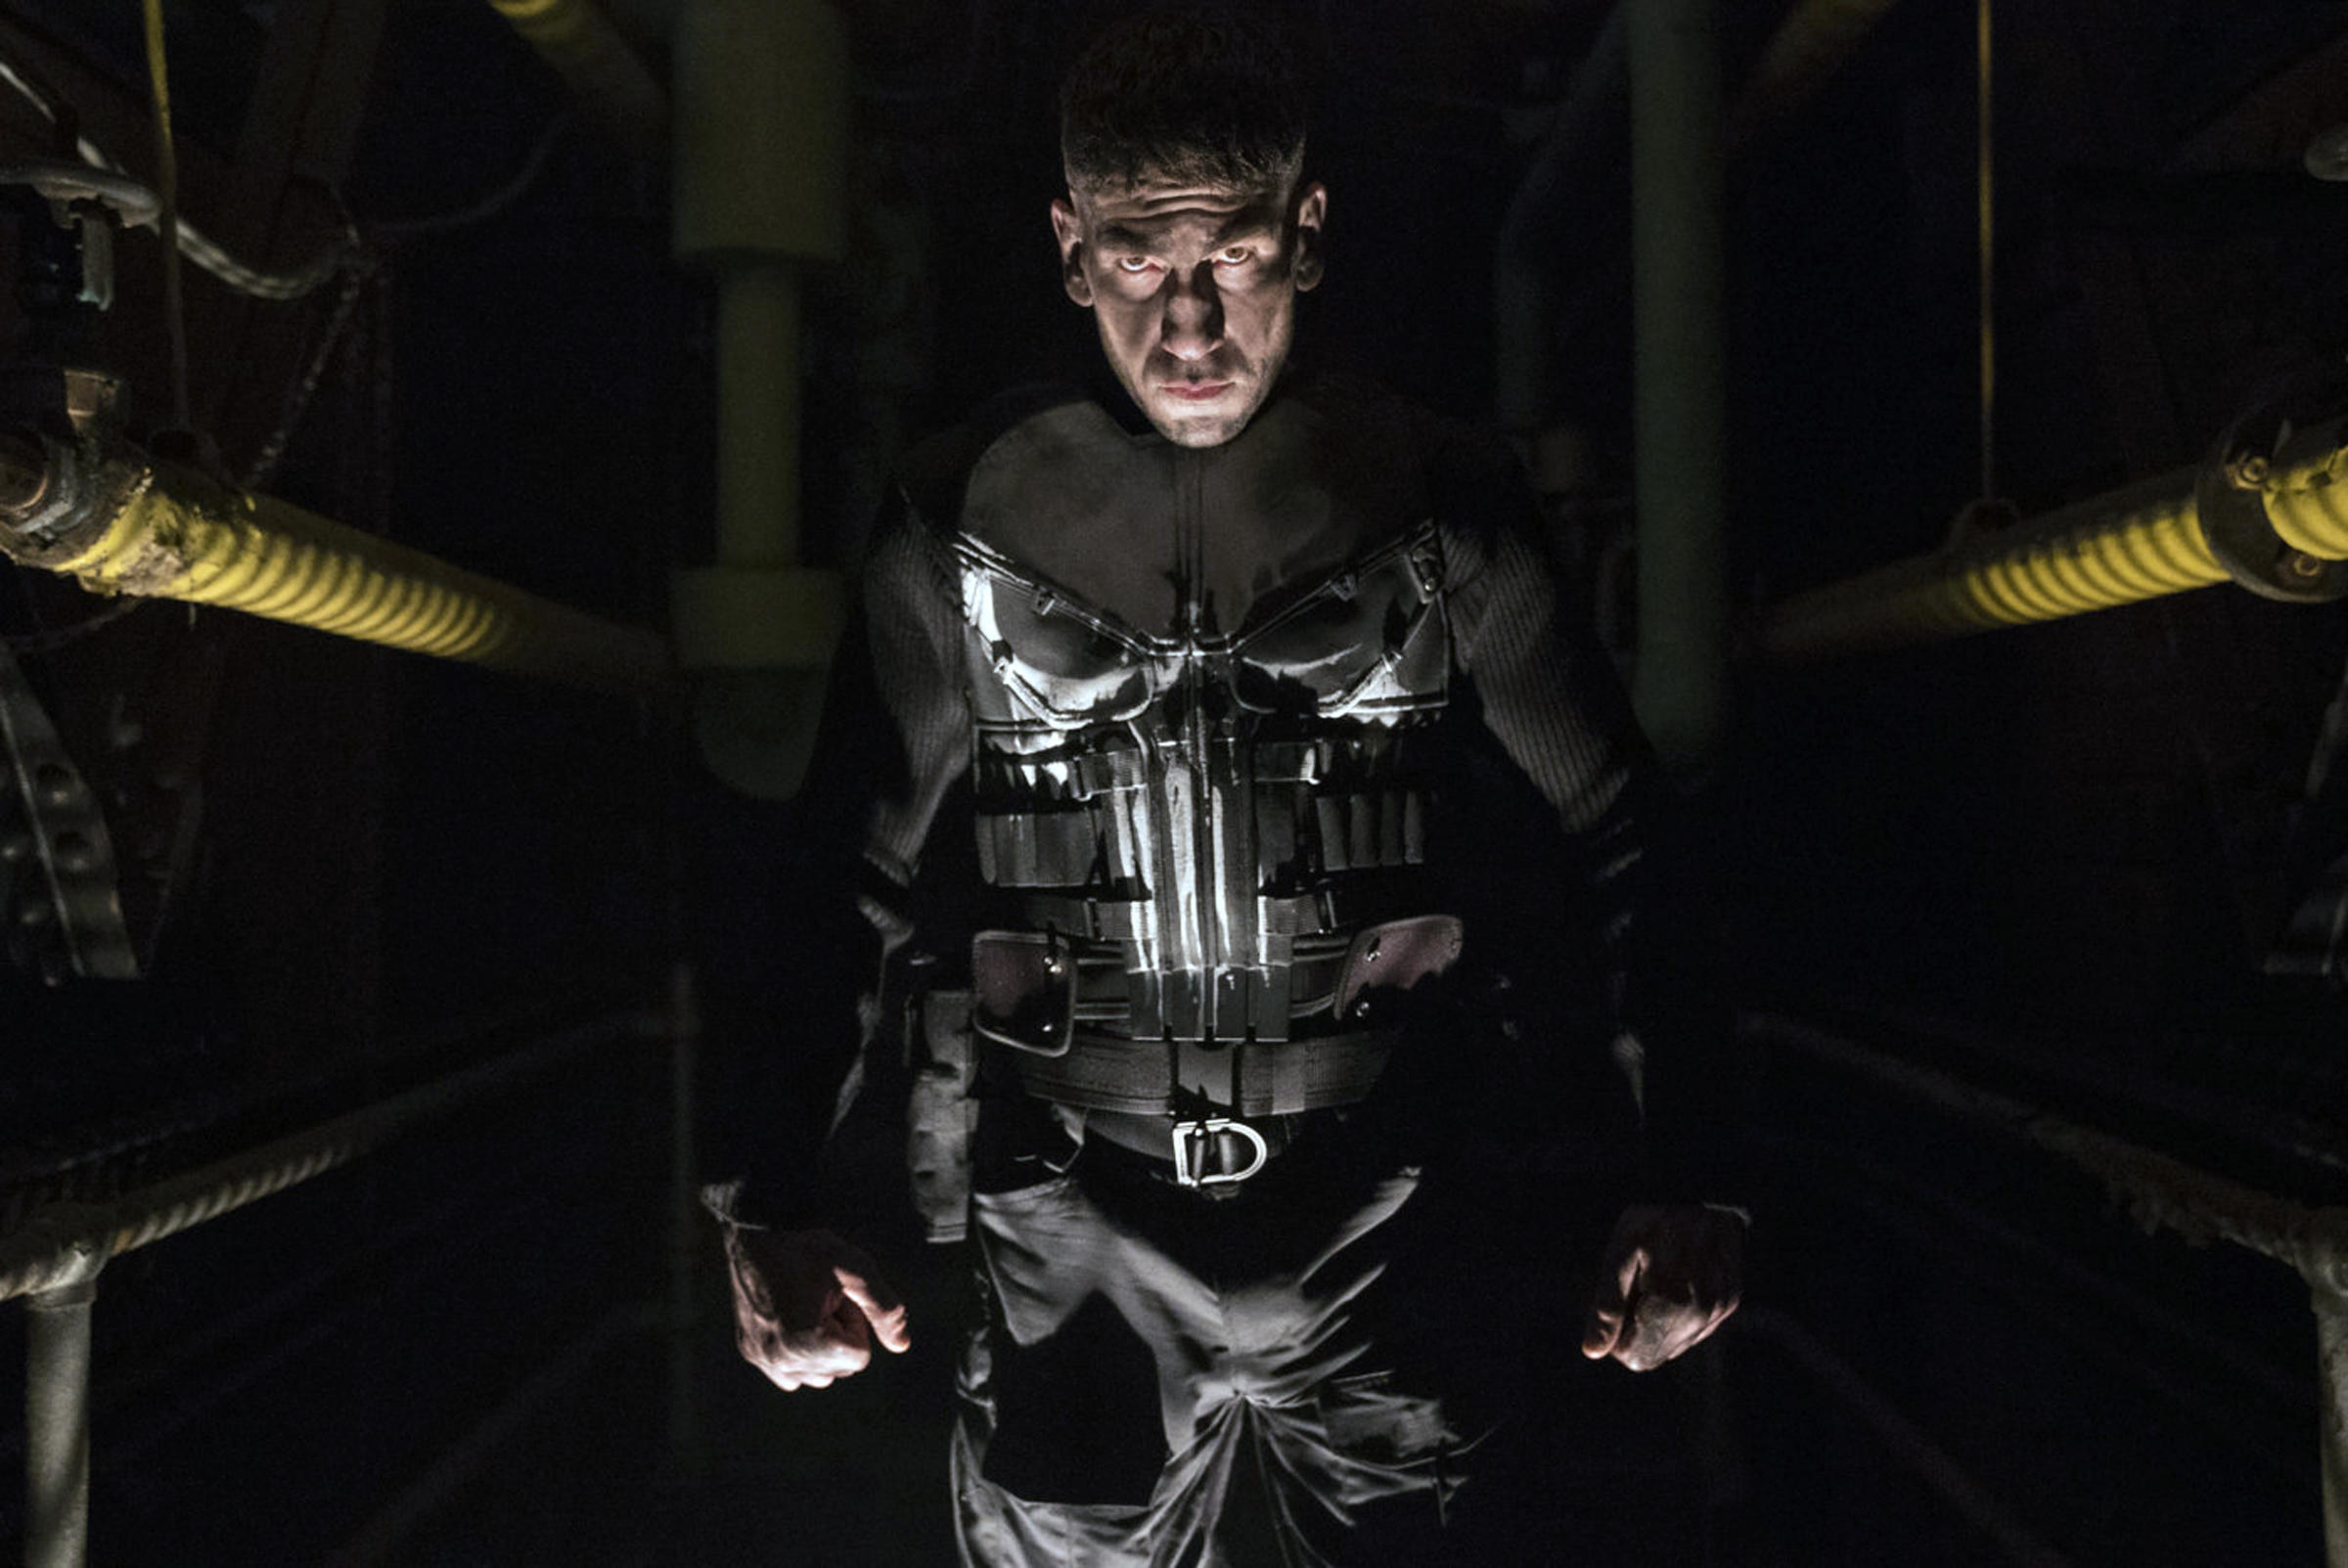 Frank Castle stands intensely in a boiler room in &quot;The Punisher&quot;